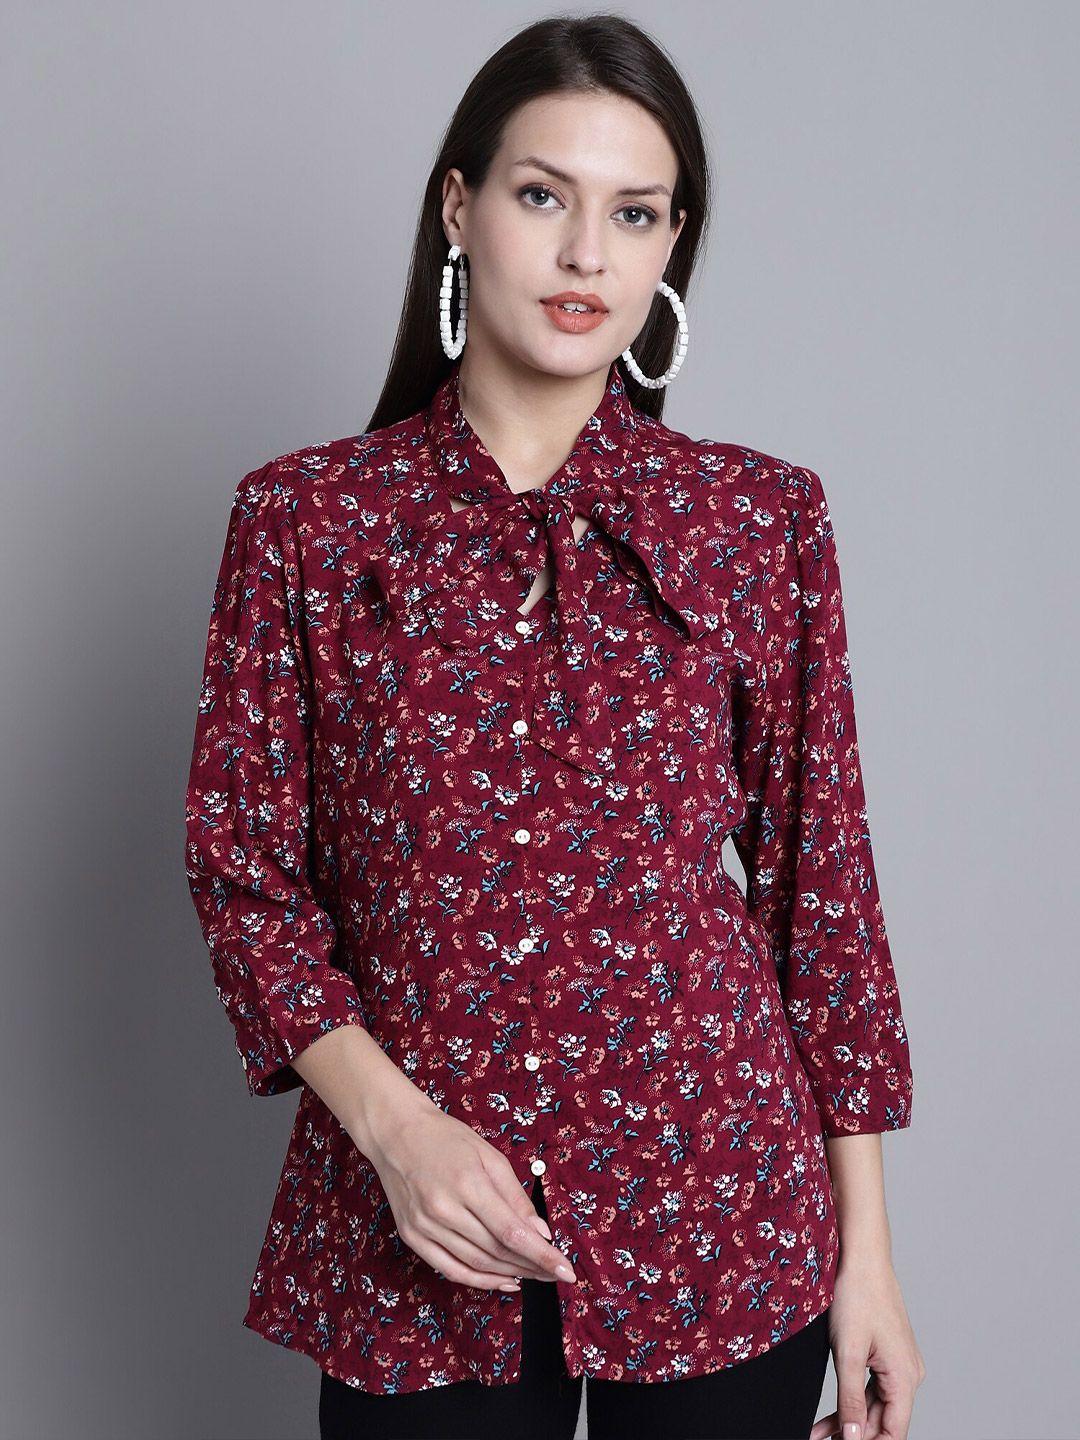 Cantabil Maroon Floral Print Tie-Up Neck Top